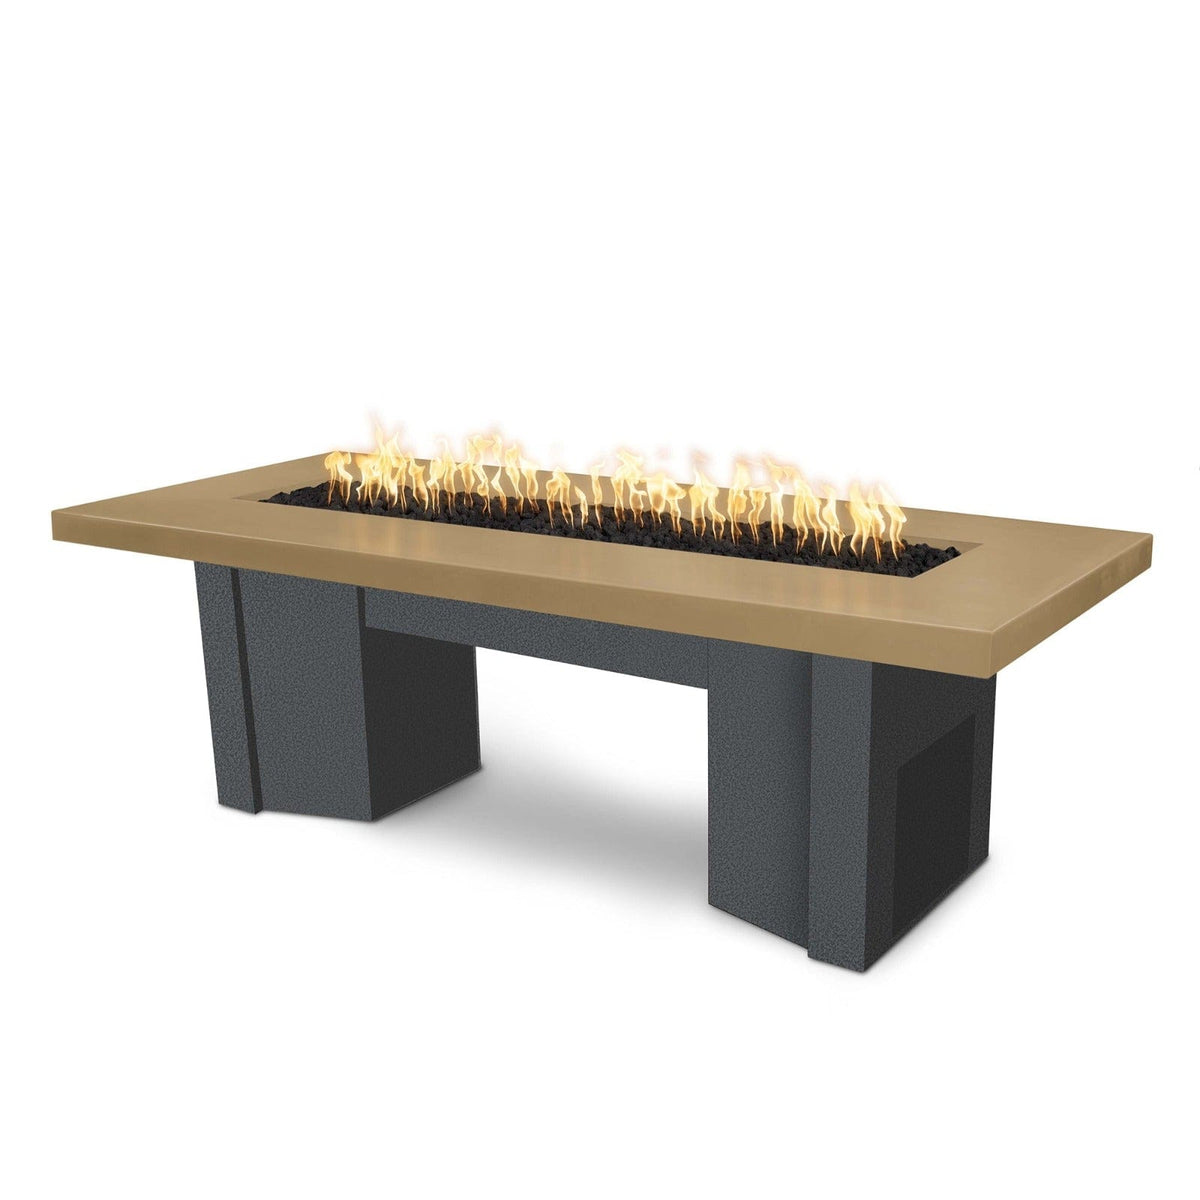 The Outdoor Plus Fire Features Brown (-BRN) / Silver Vein Powder Coated Steel (-SLV) The Outdoor Plus 60&quot; Alameda Fire Table Smooth Concrete in Natural Gas - Match Lit with Flame Sense System / OPT-ALMGFRC60FSML-NG